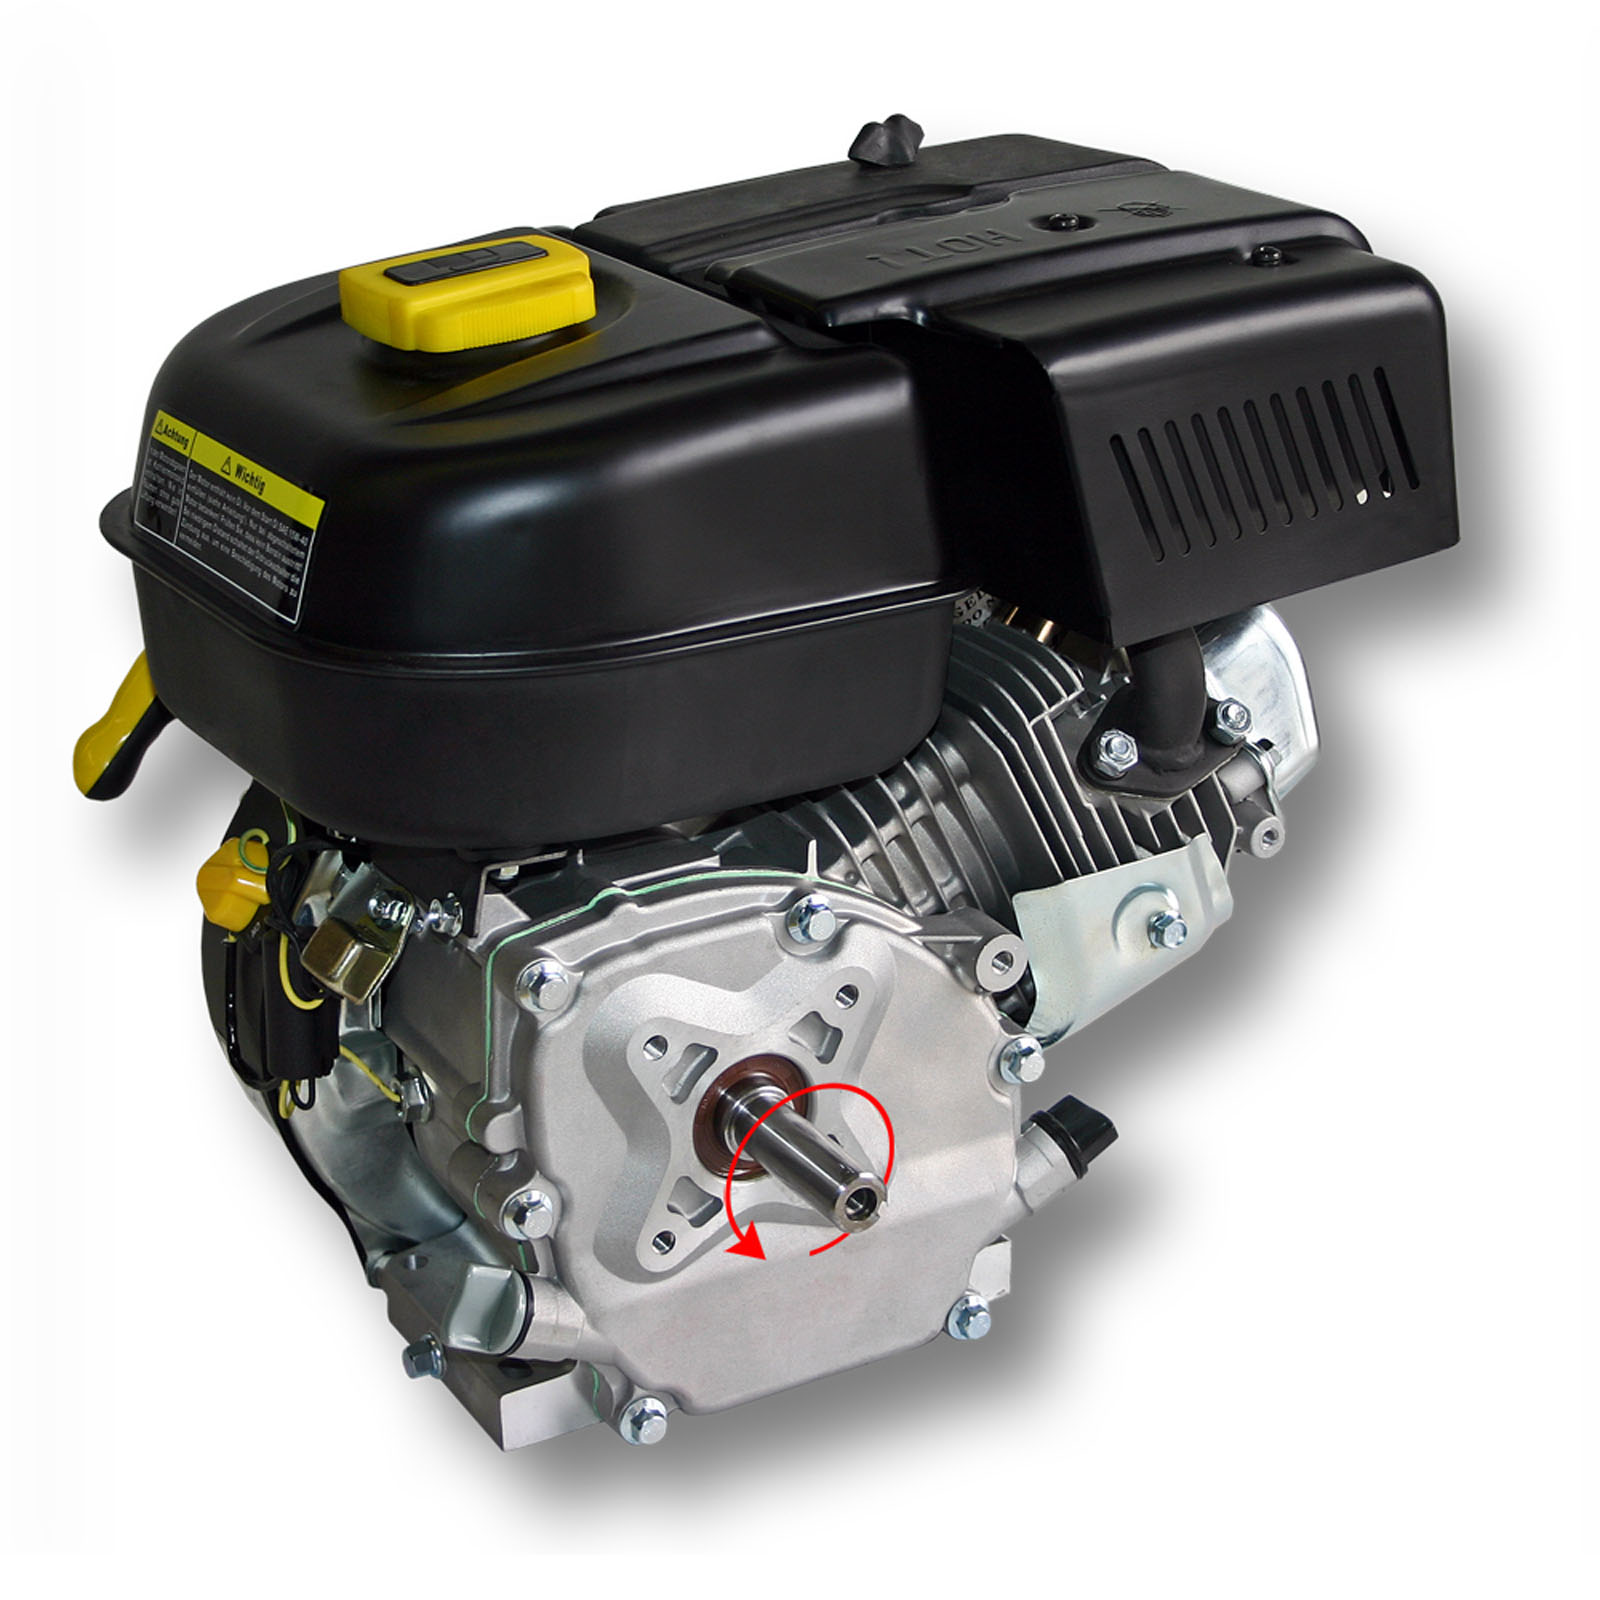 15mm Wiltec LIFAN 152 petrol gasoline engine 1.8kW 2.45HP 0.5 air-cooled single cylinder recoil start